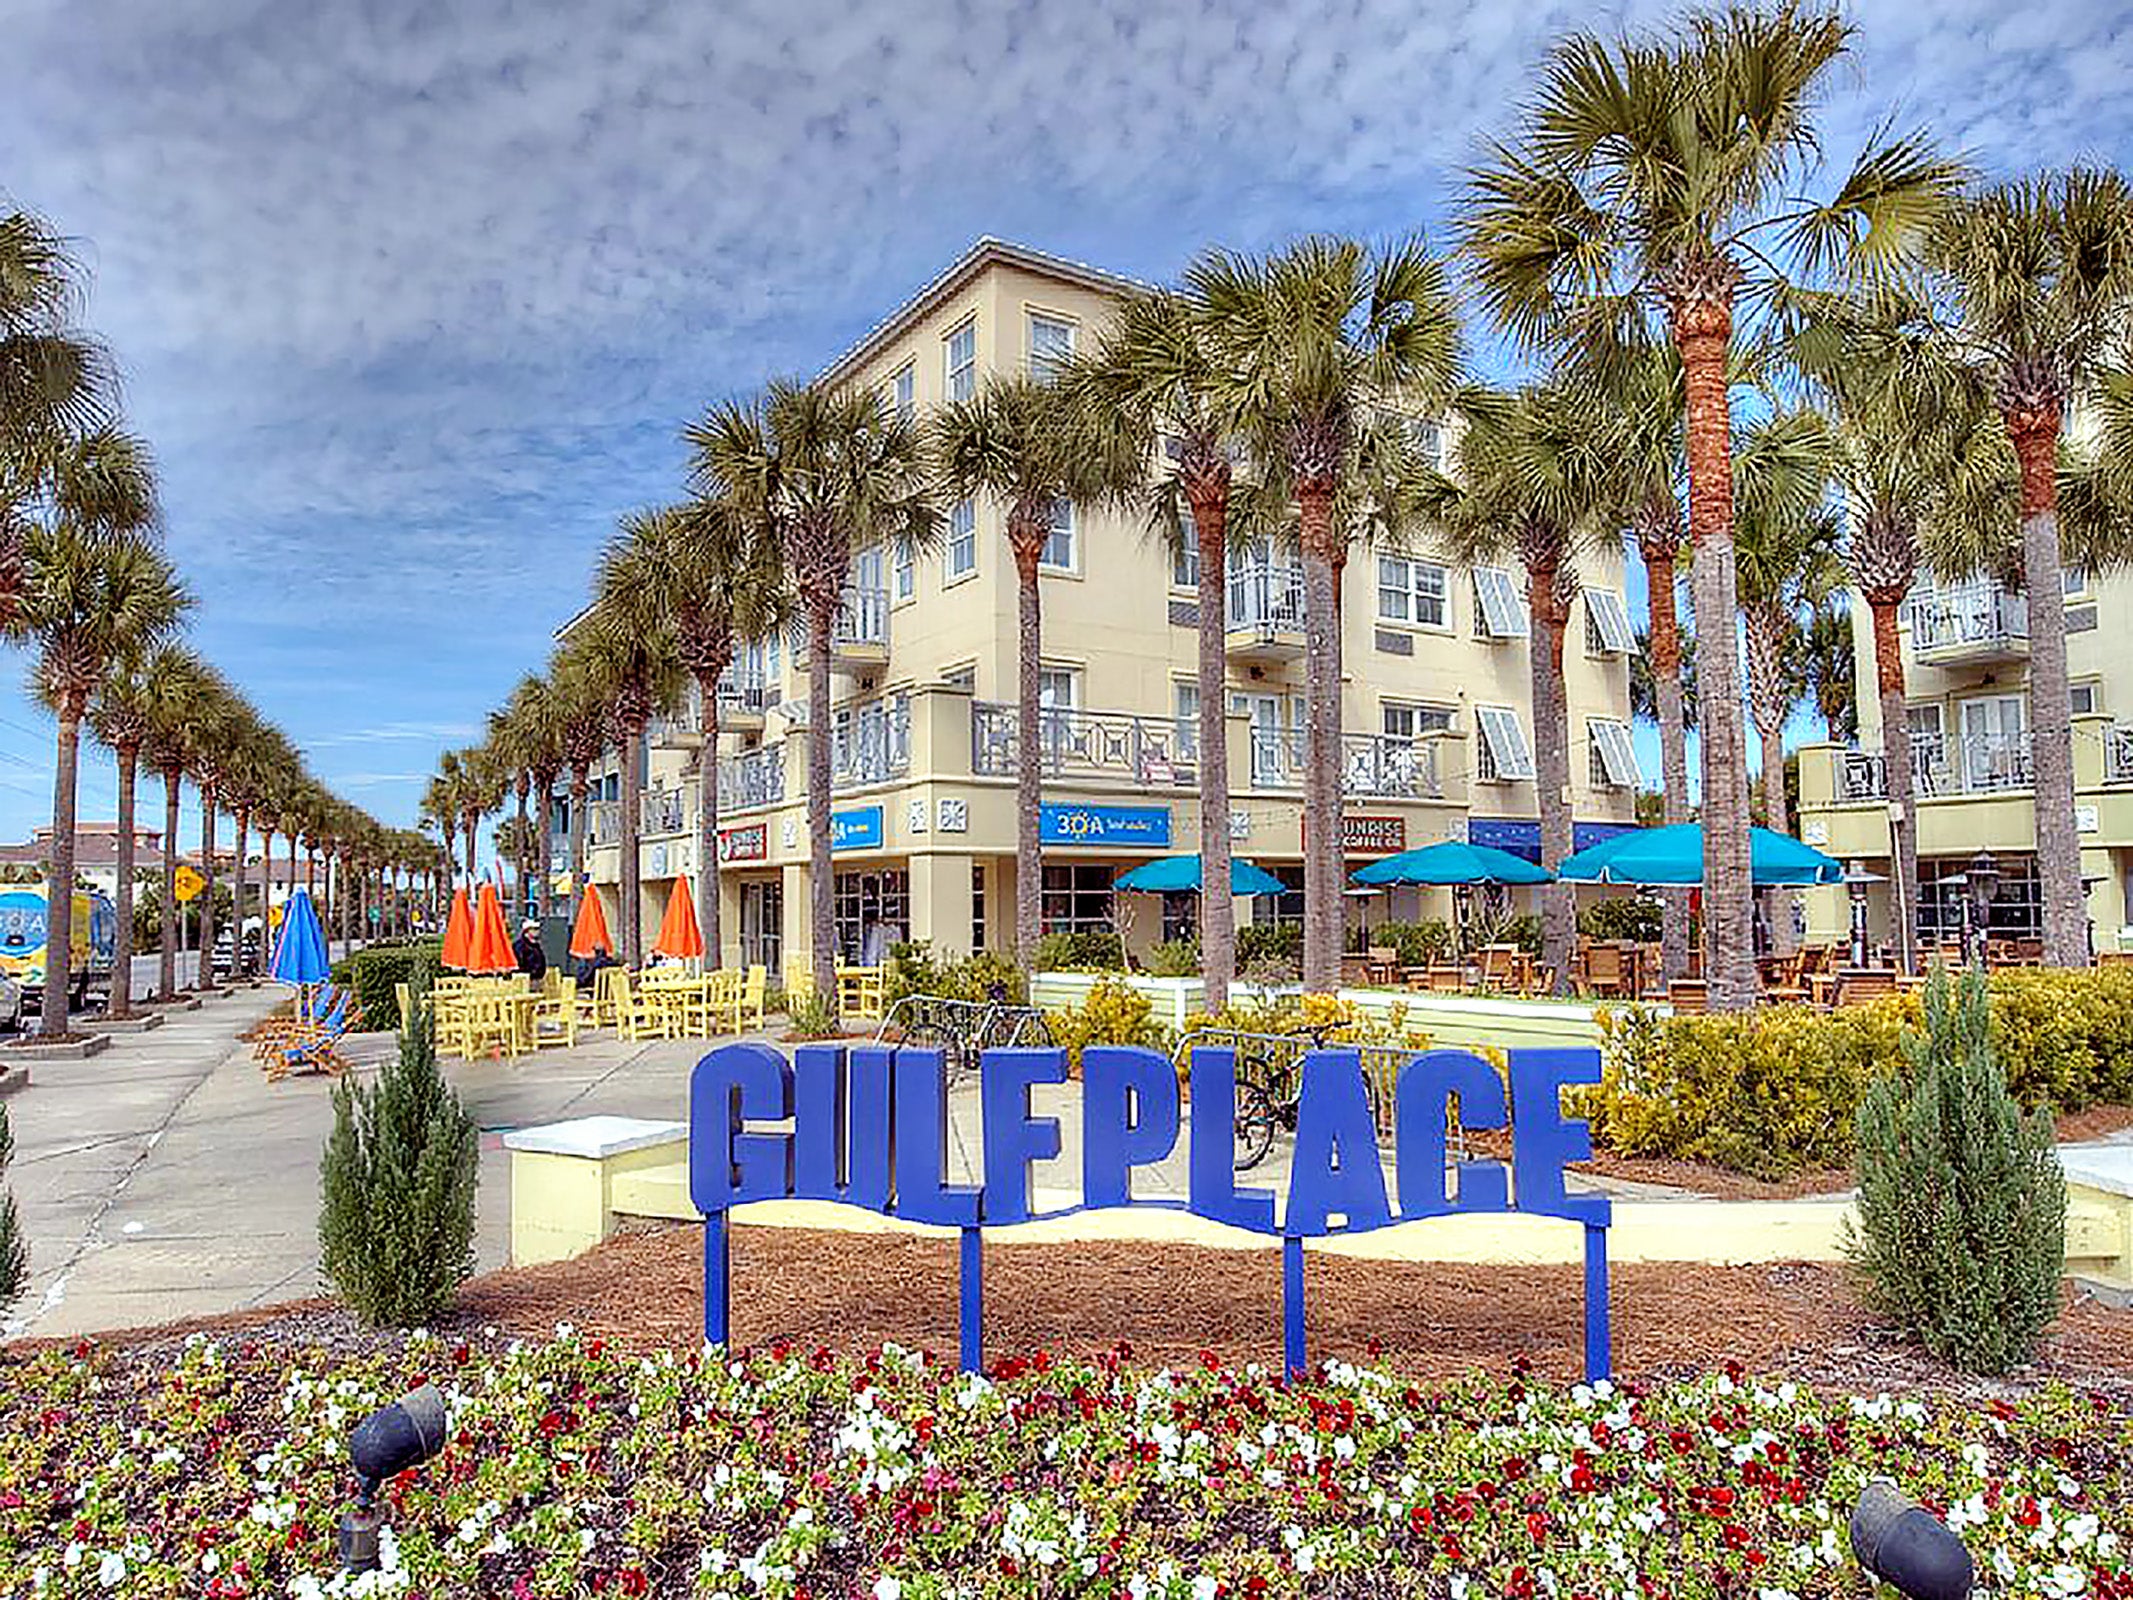 Visit Gulf Place for great shopping and dining